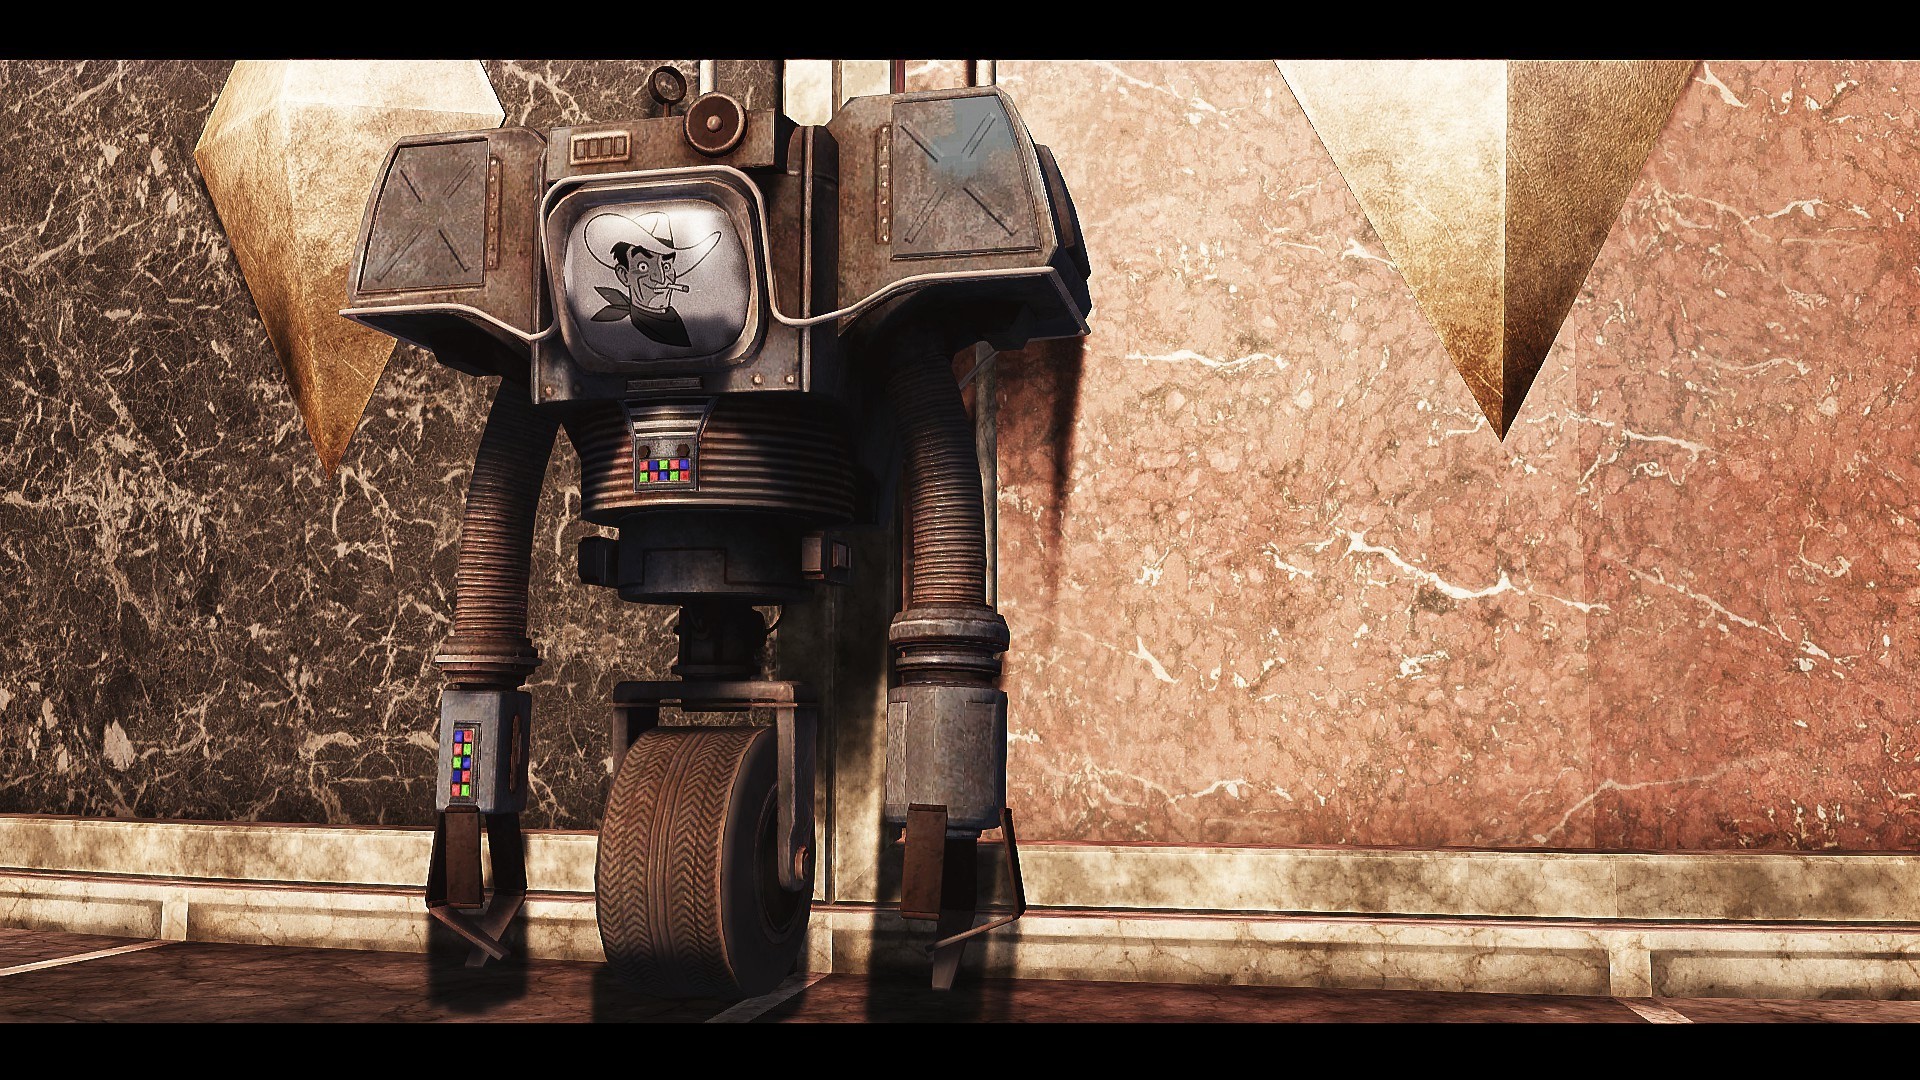 1920x1080 Pictures for Desktop: fallout new vegas wallpaper (Beyonce Allford  )